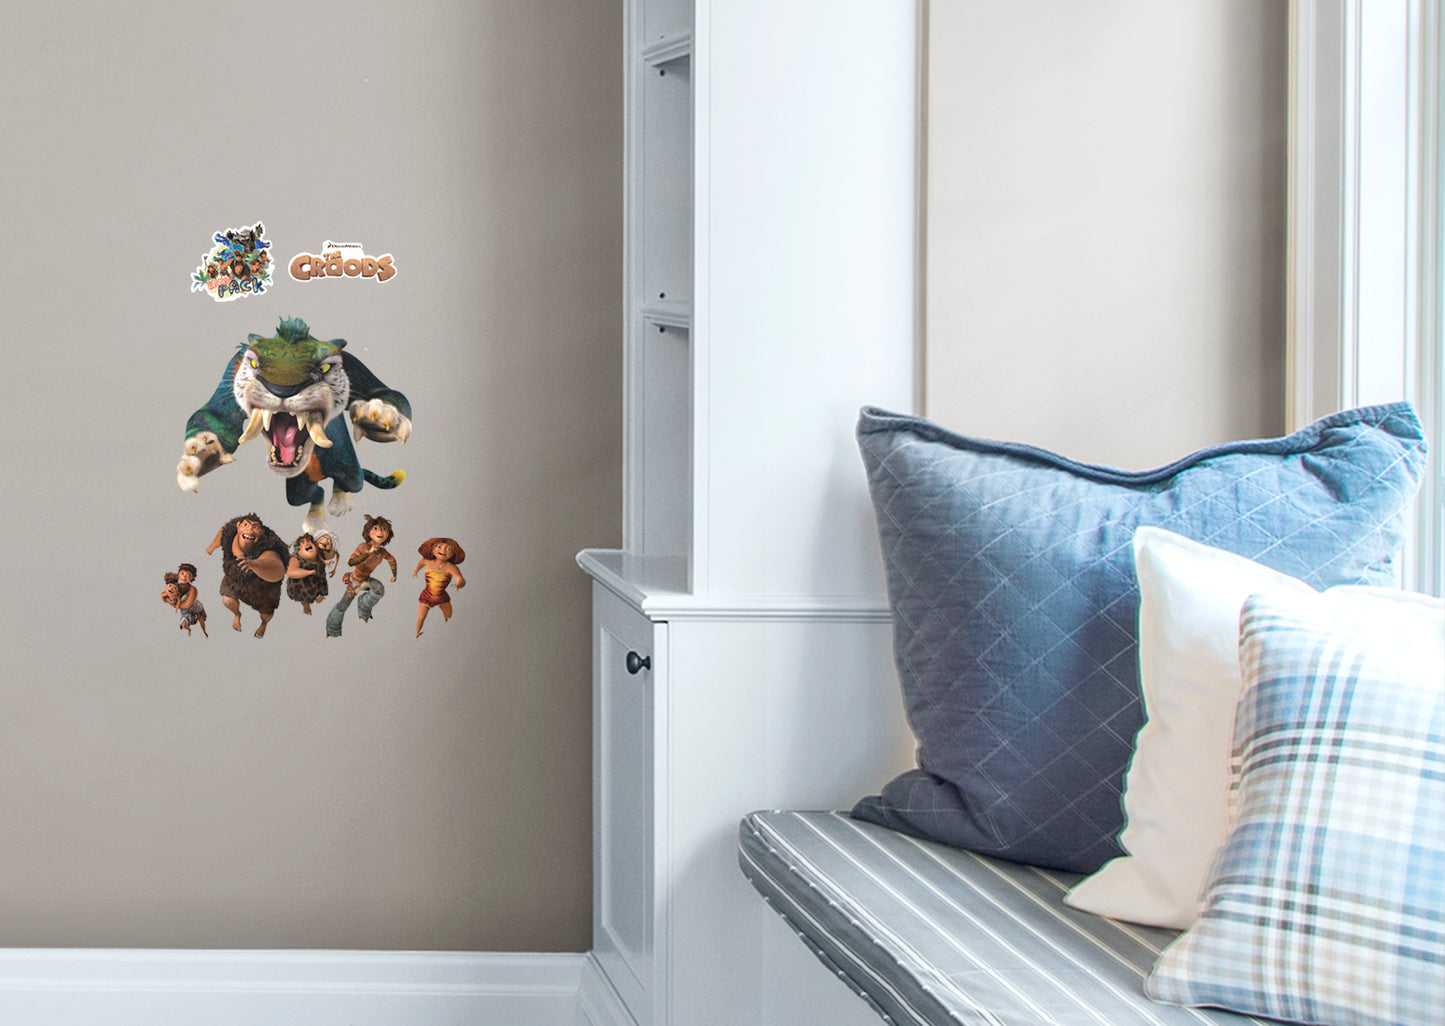 The Croods:  Family Sabretooth RealBig        - Officially Licensed NBC Universal Removable Wall   Adhesive Decal